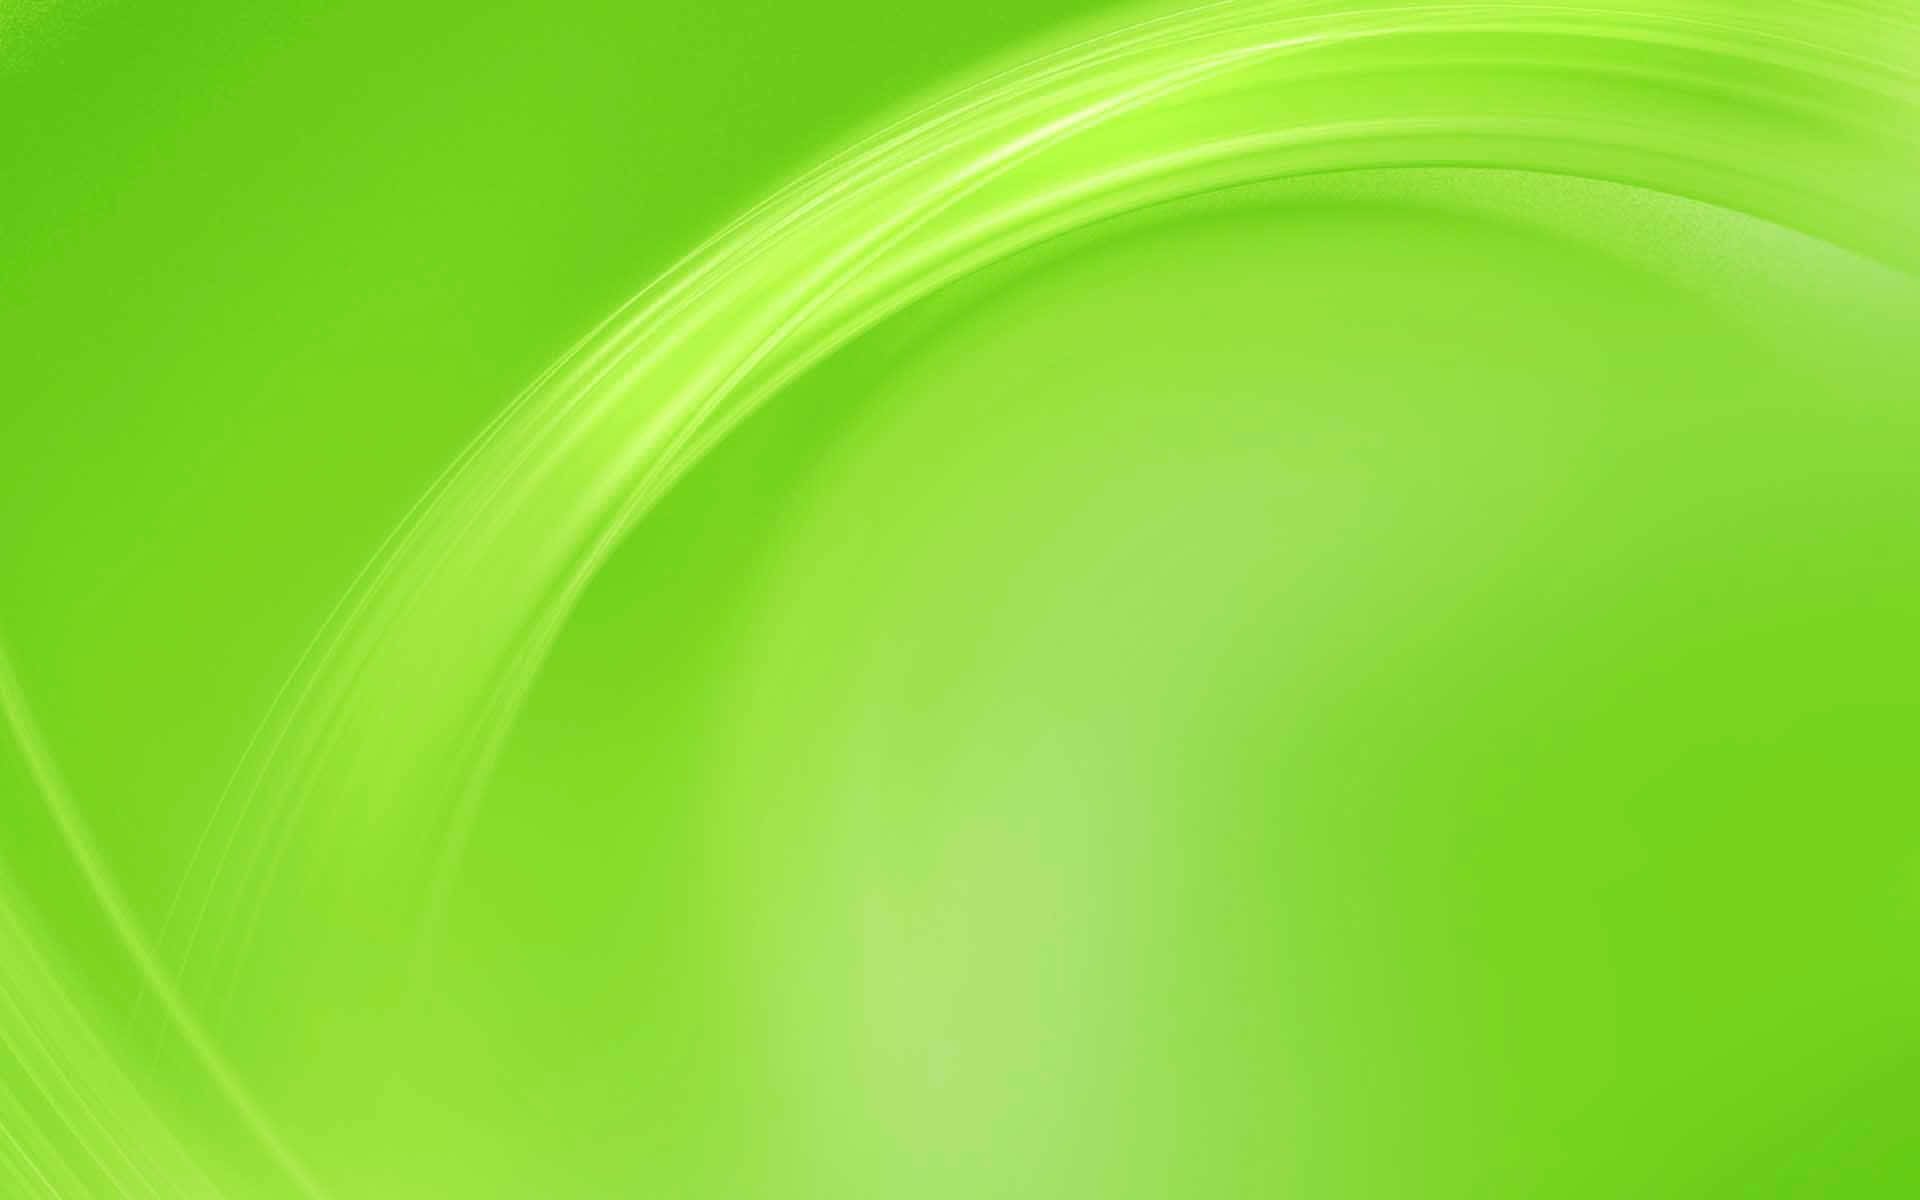 A Fresh, Solid Green Background